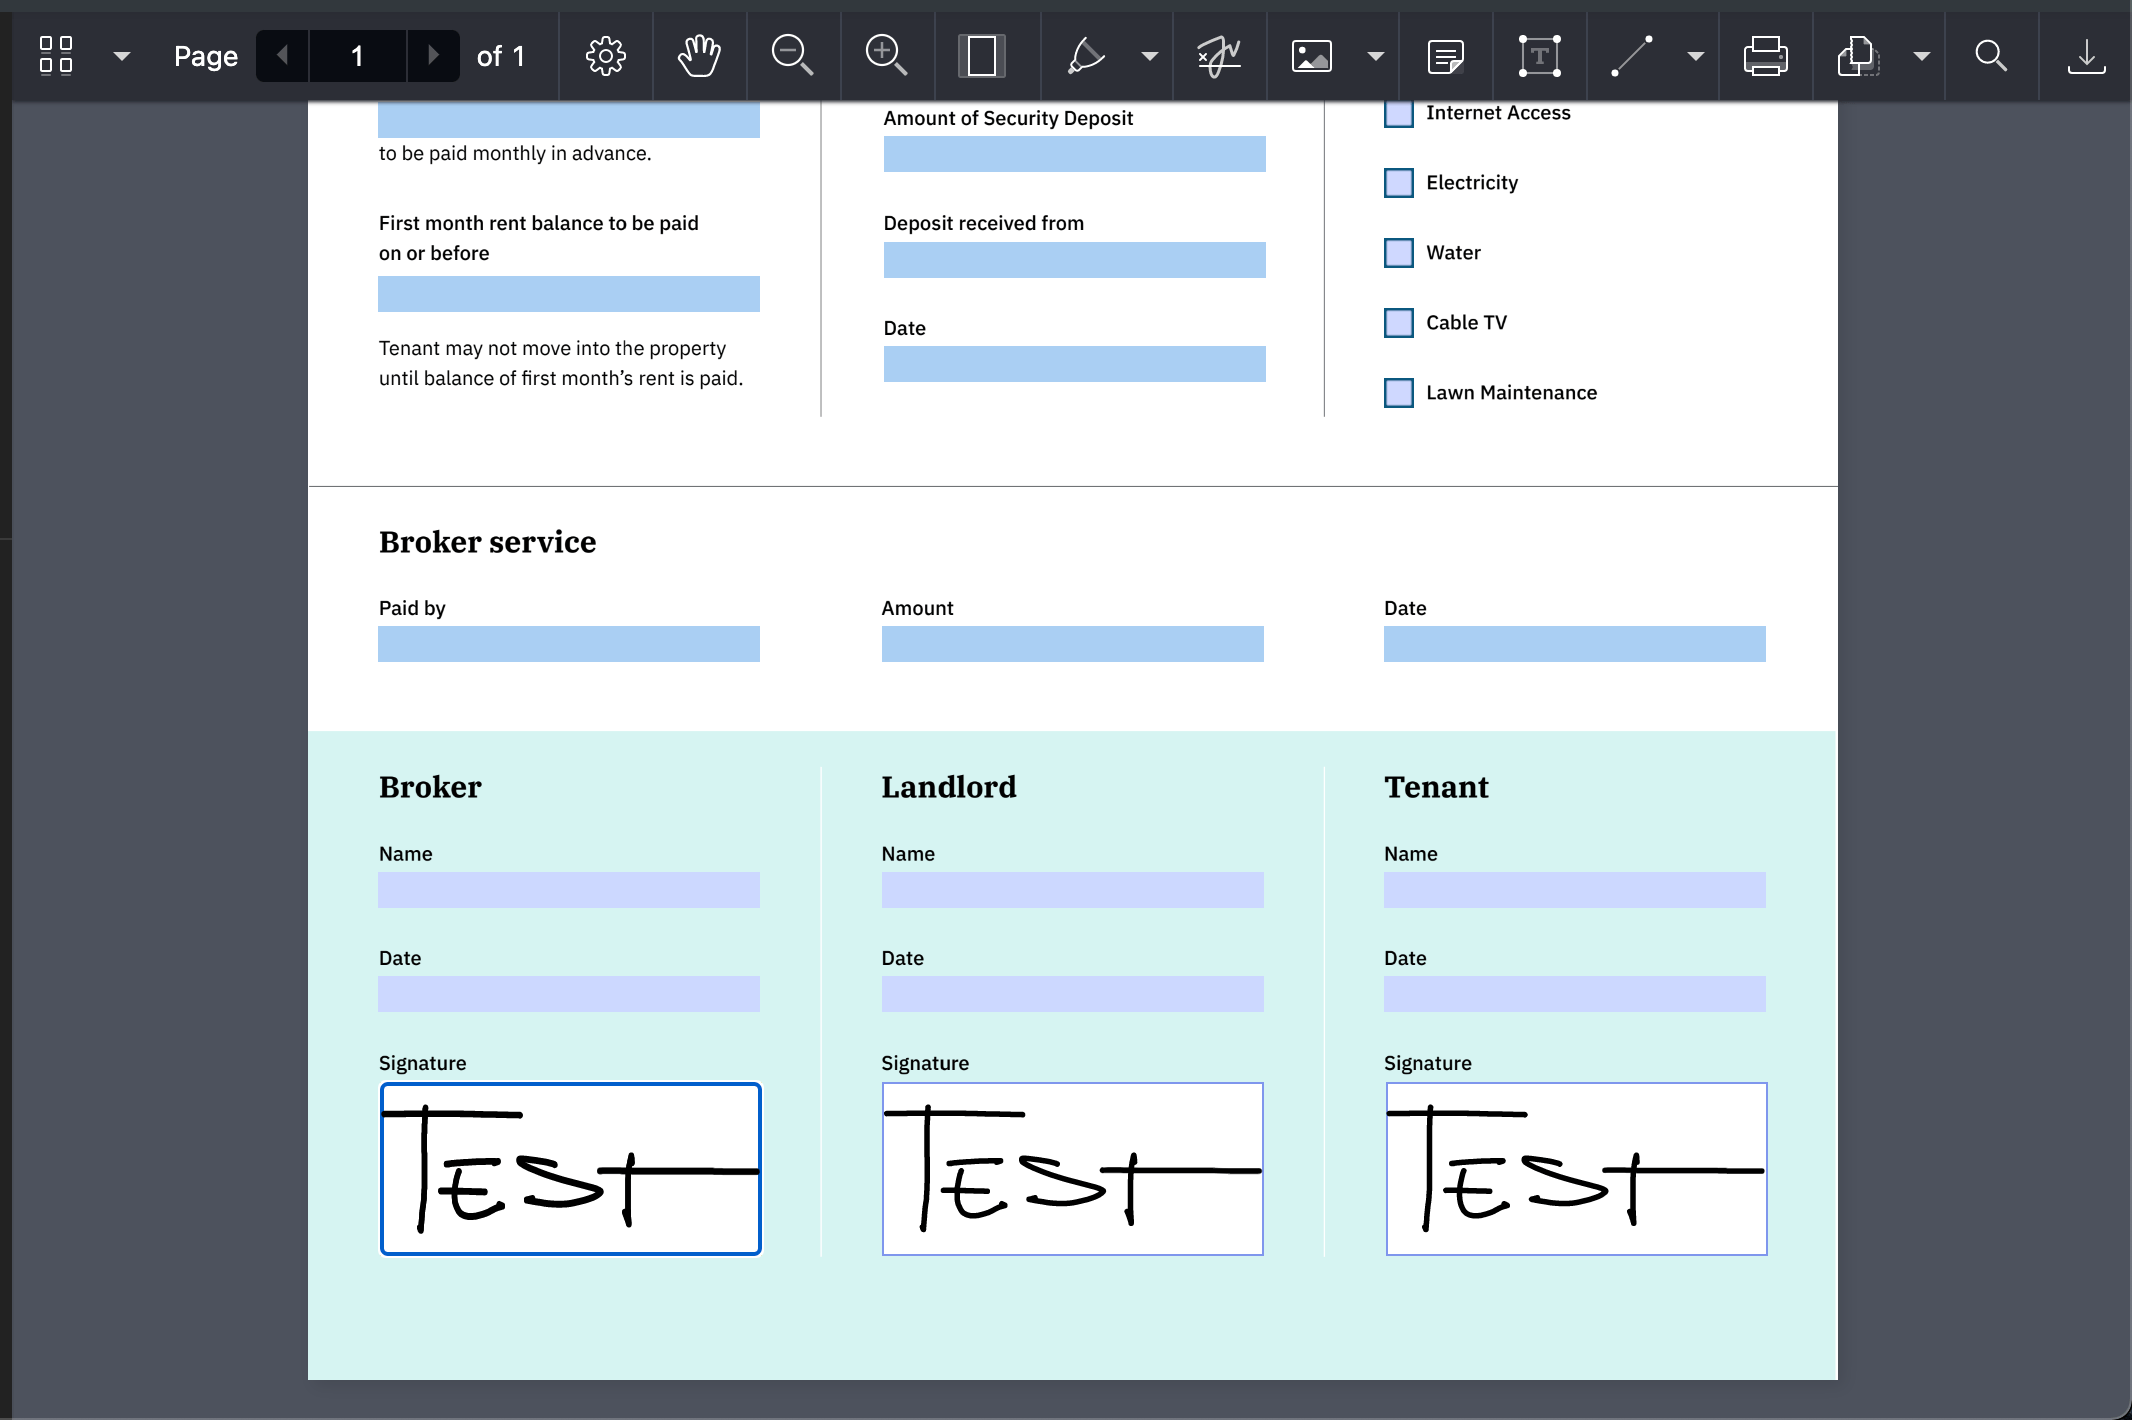 Example of populated signature form fields